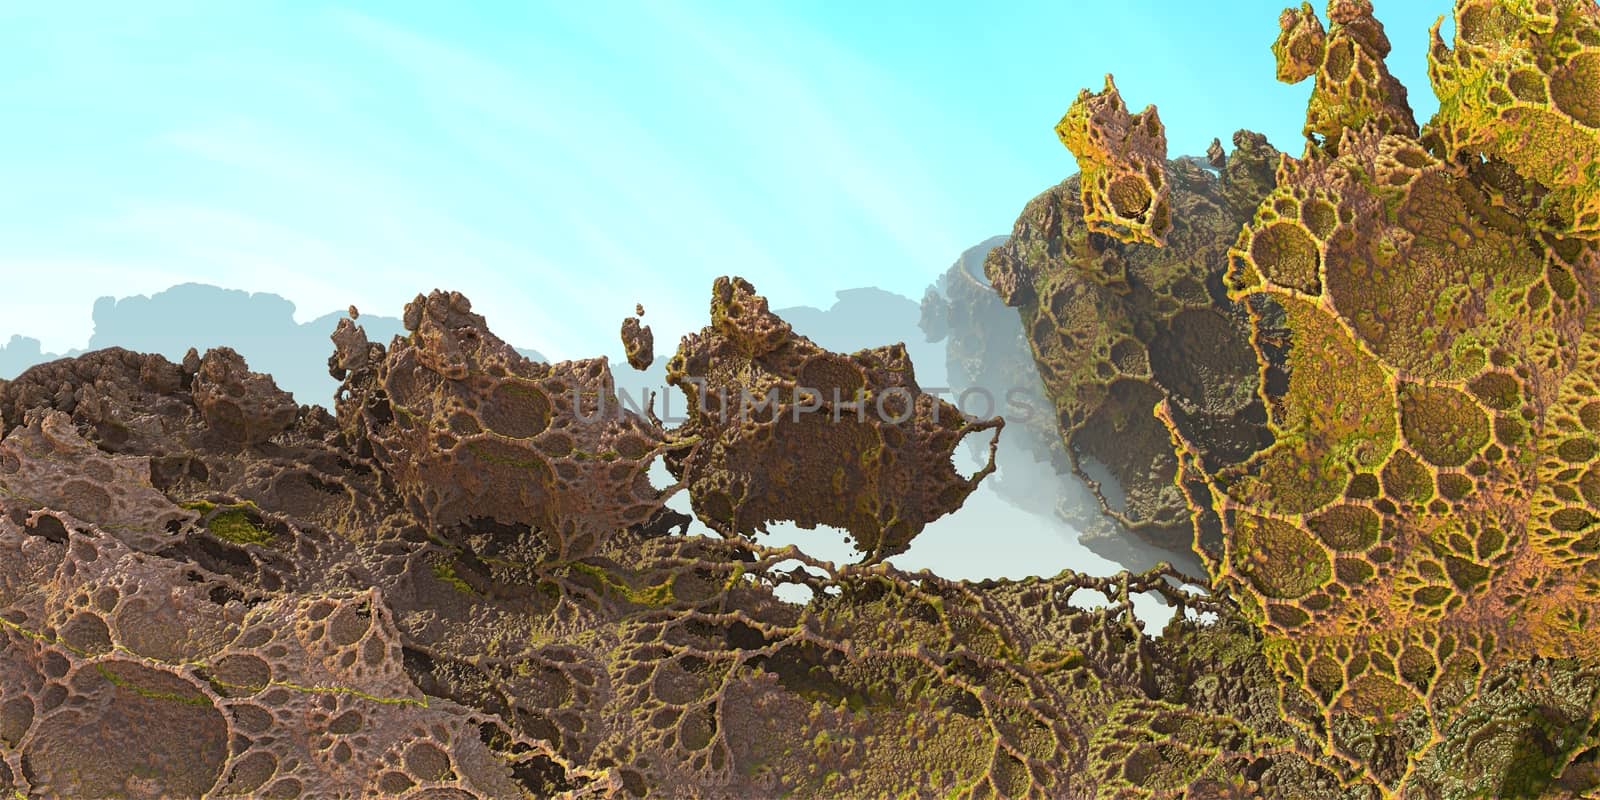 Computer rendered virtual scenery for creative design, art and entertainment